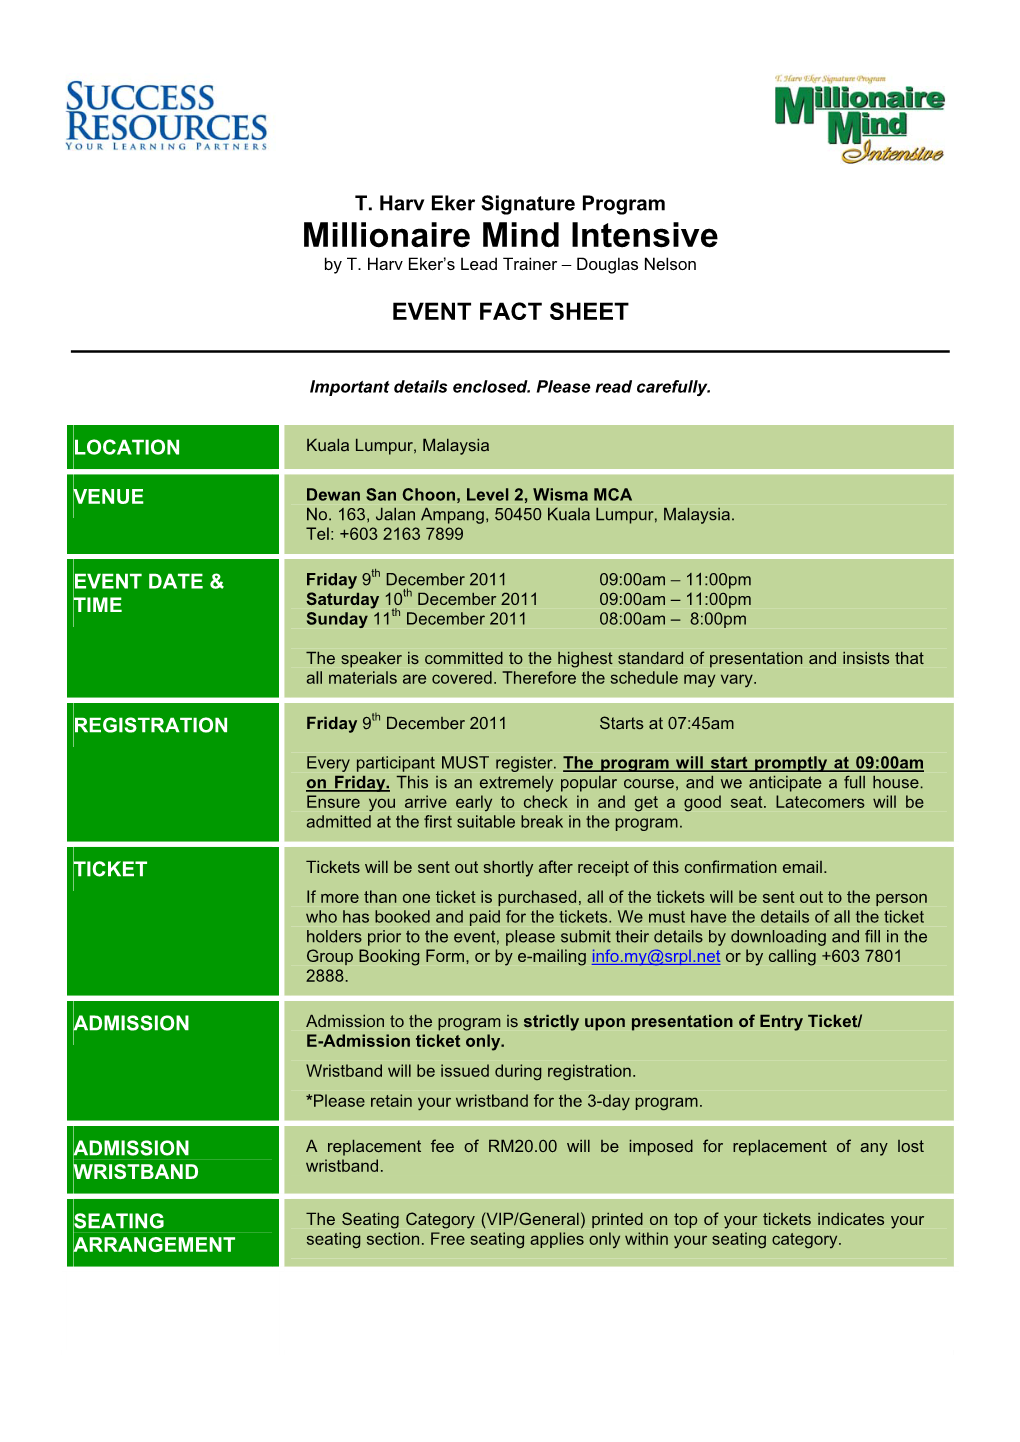 Millionaire Mind Intensive by T